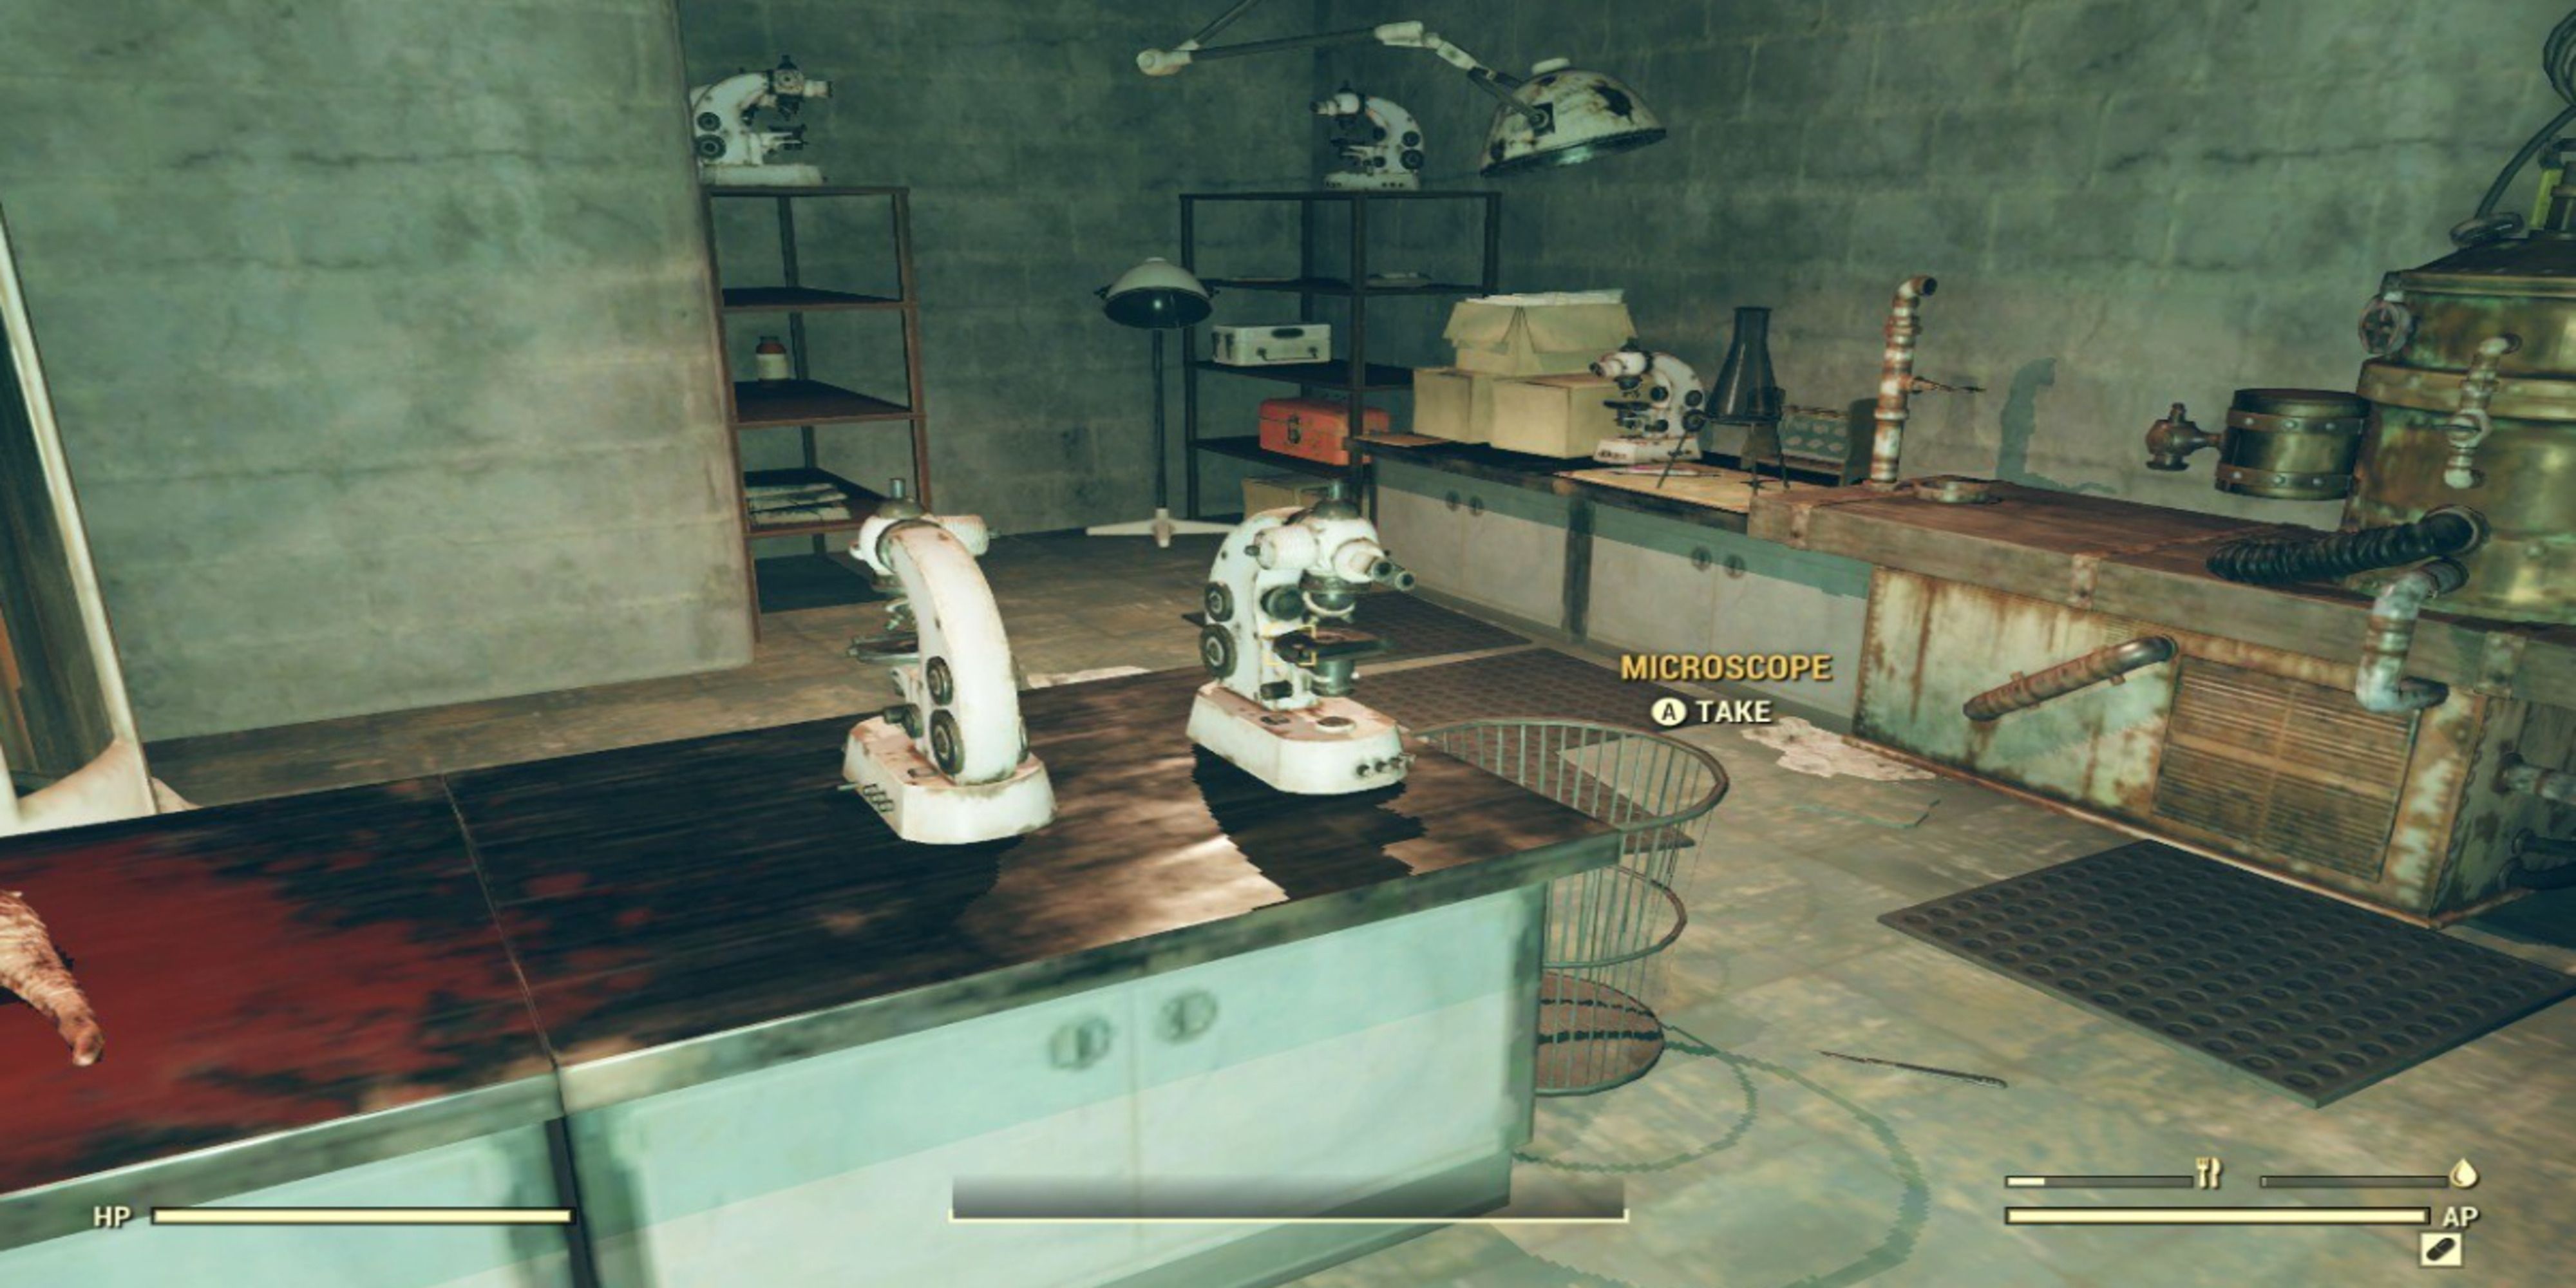 Looting lots of Microscopes from Ella Ames' Bunker in Fallout 76